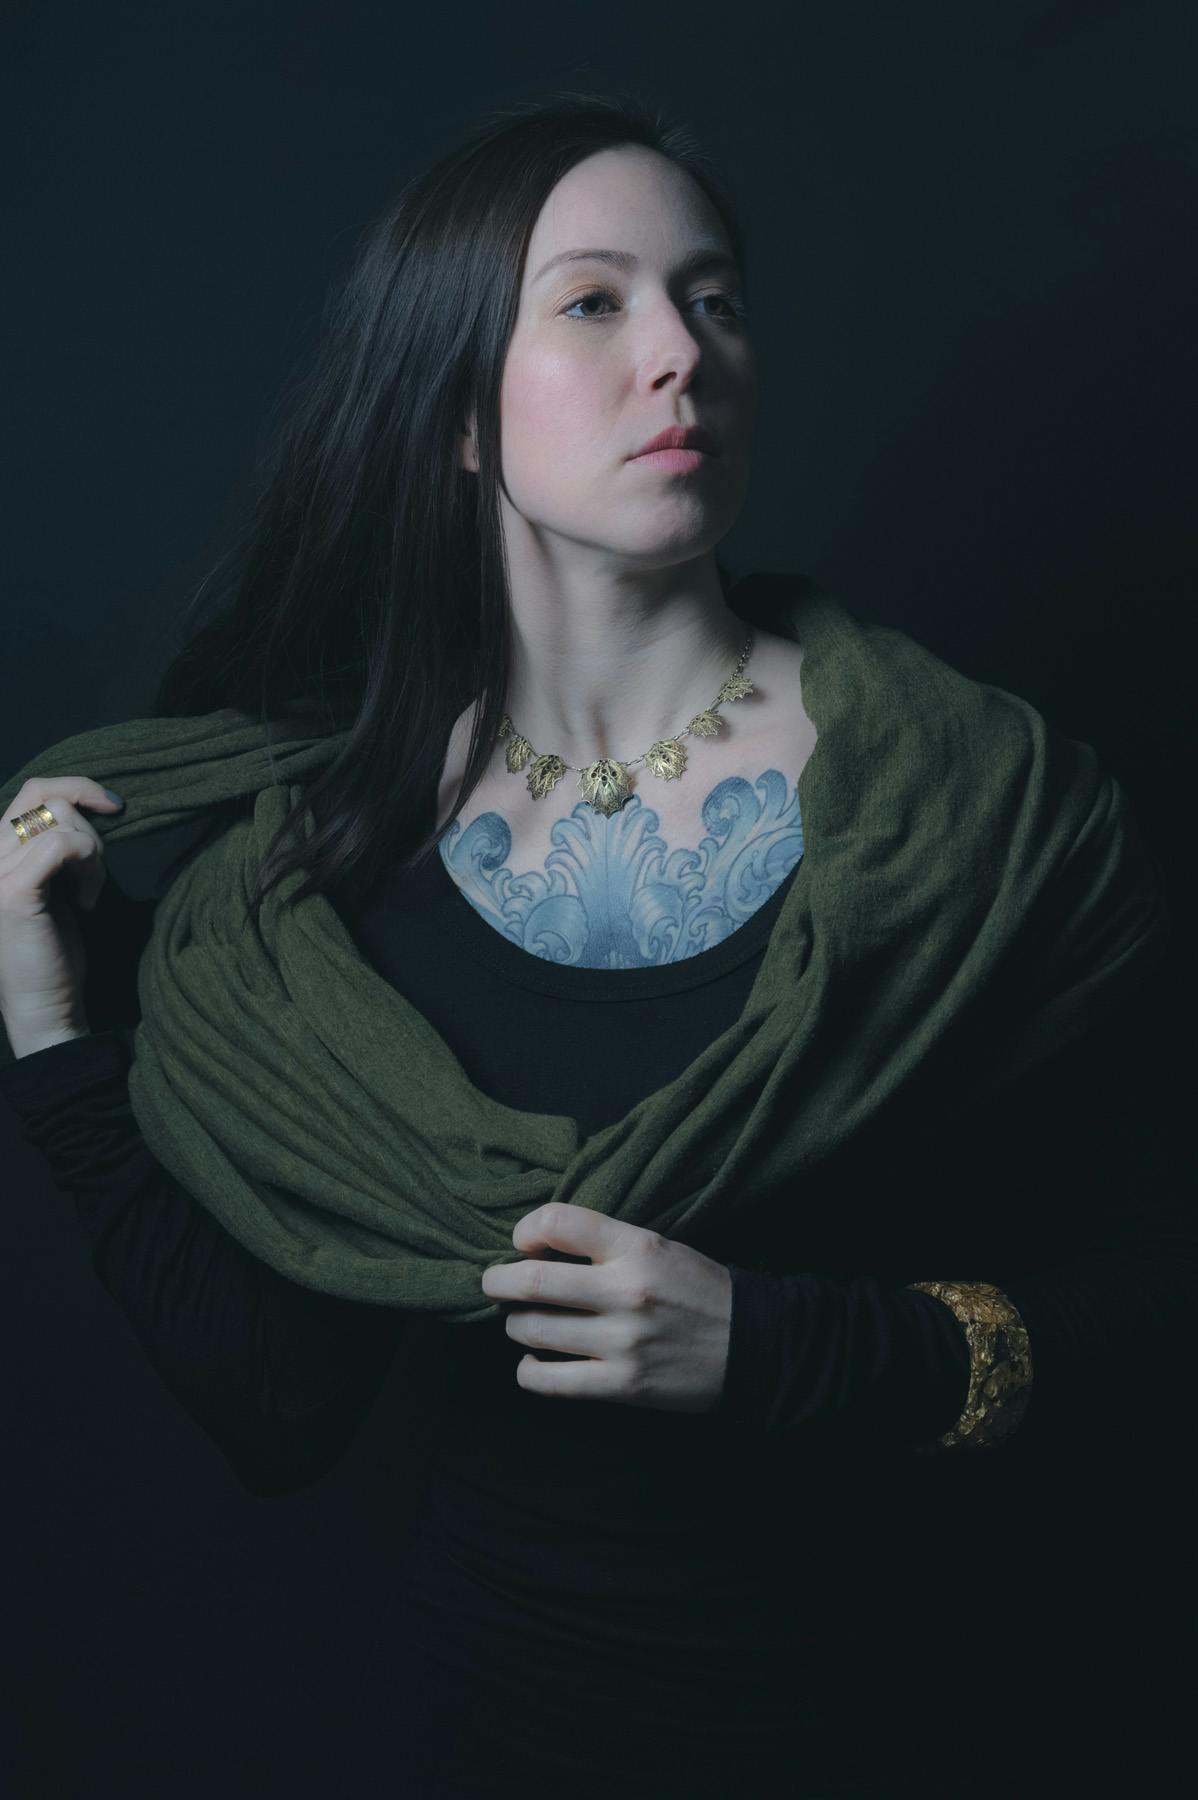 A portrait of Amelie wearing a black top with an ornate gold band around her left forearm, with a green scarf around her shoulder. she is in front of a black background.